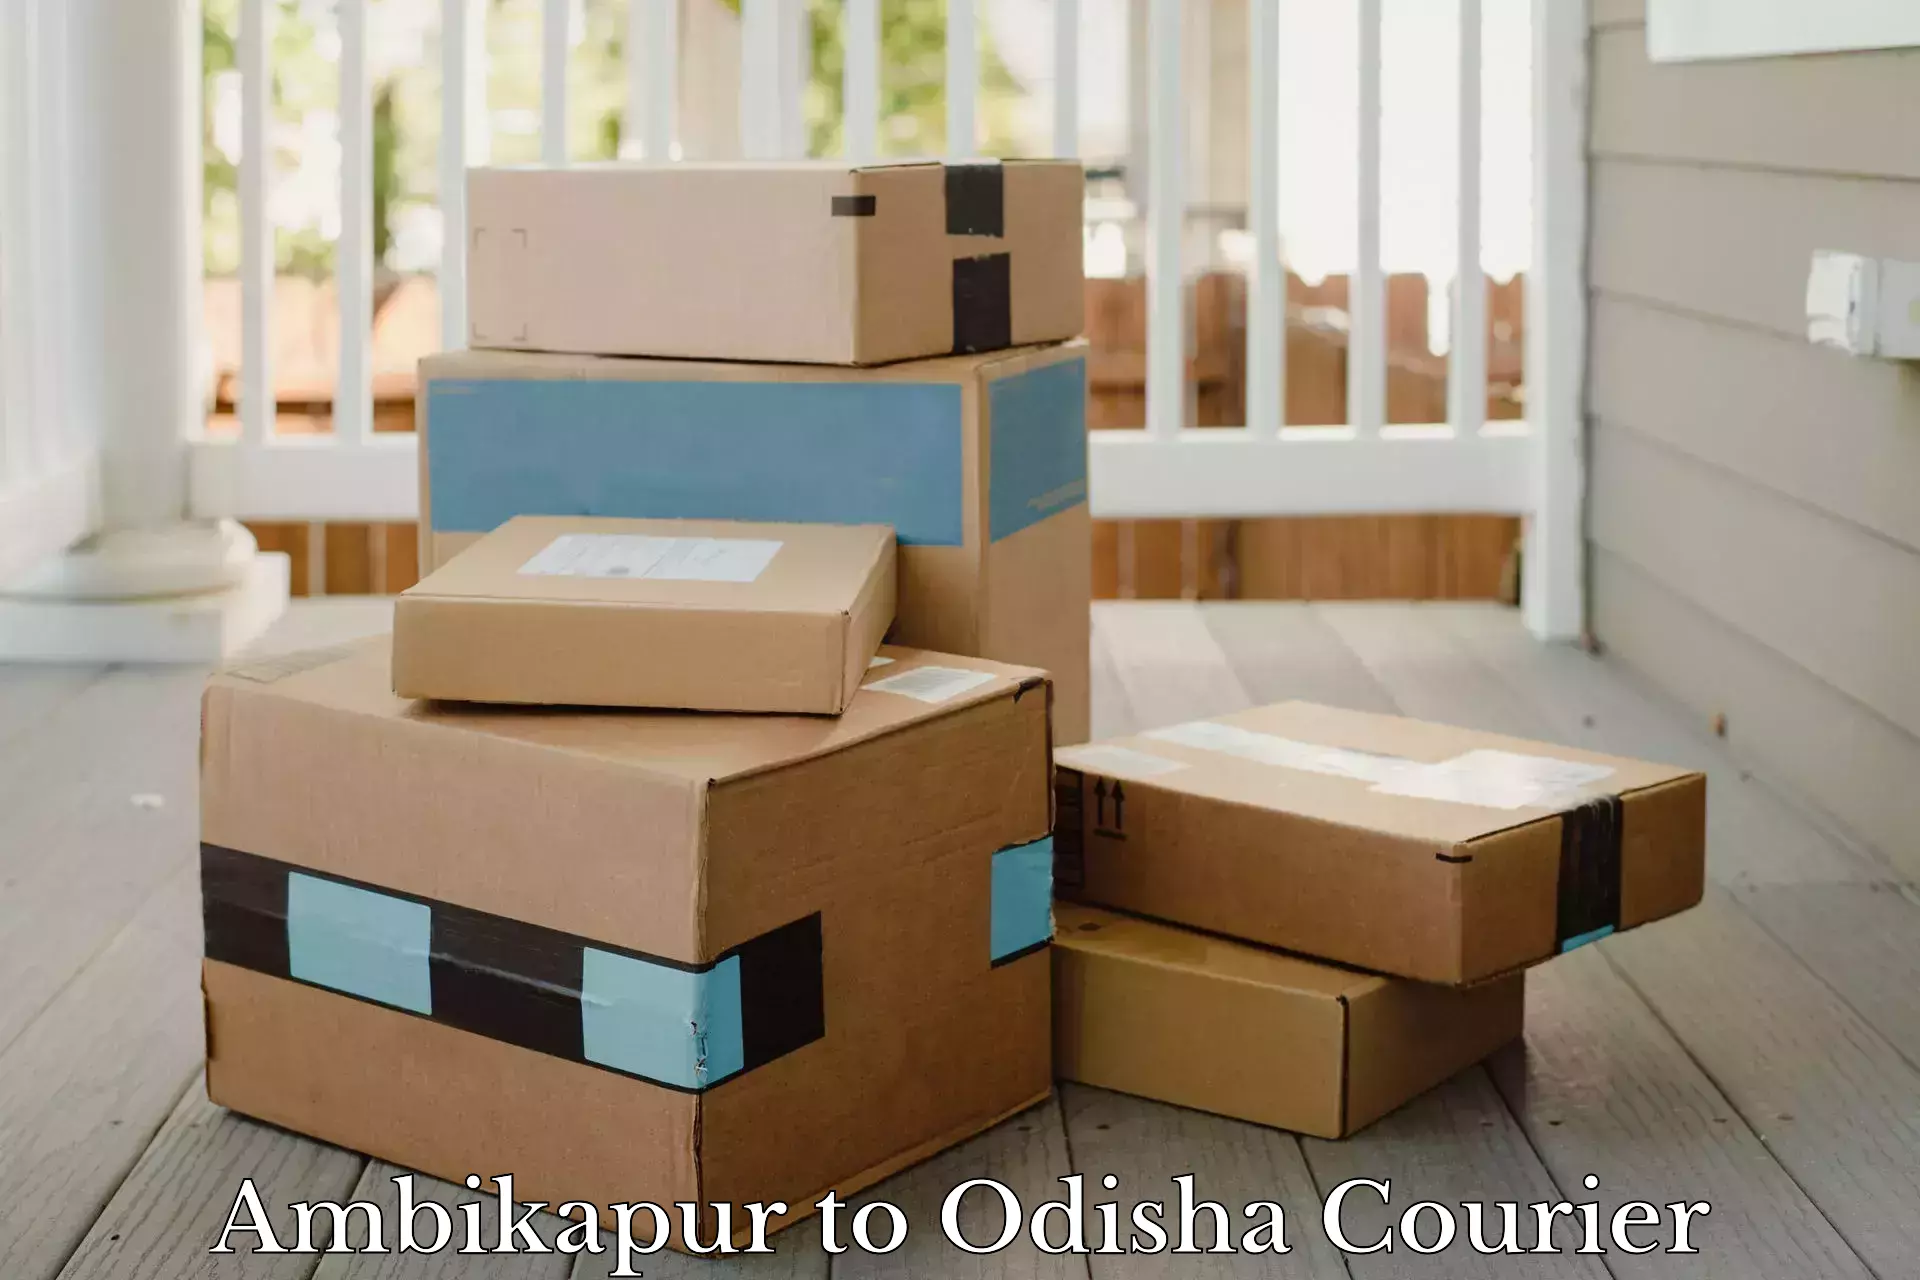 Package delivery network Ambikapur to Sonepur